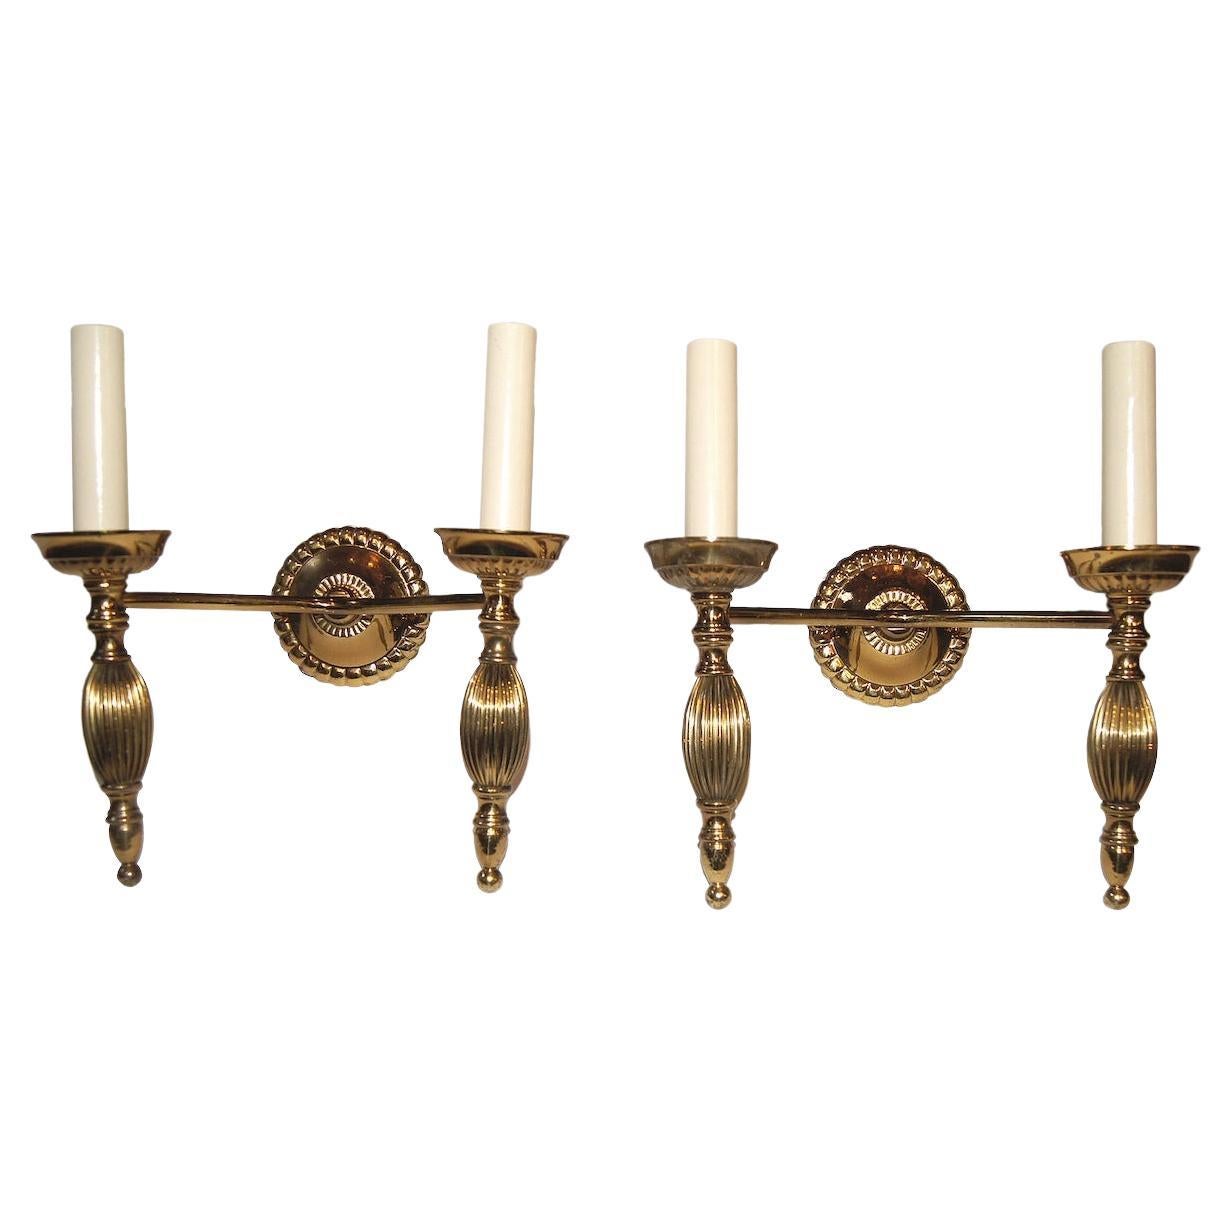 Set of Moderne Gilt Neoclassic Style Sconces, Sold per Pair